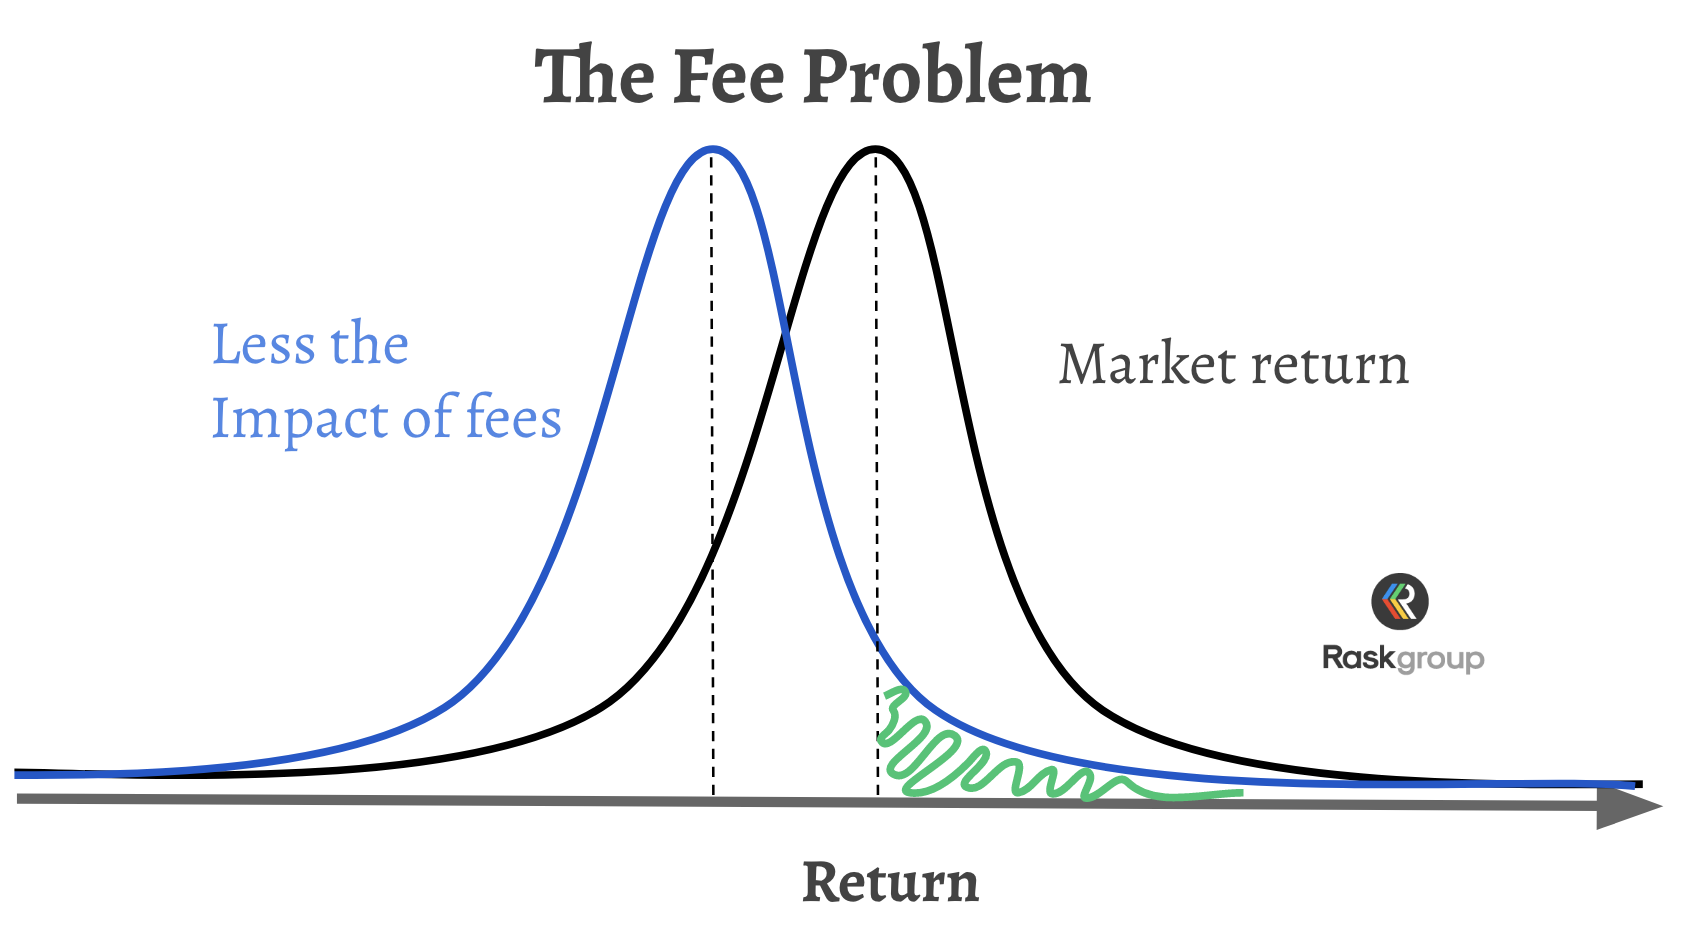 image shows two normal distributions with one overlaid slightly left of the other (on the same horizontal axis) to show the impact of fees